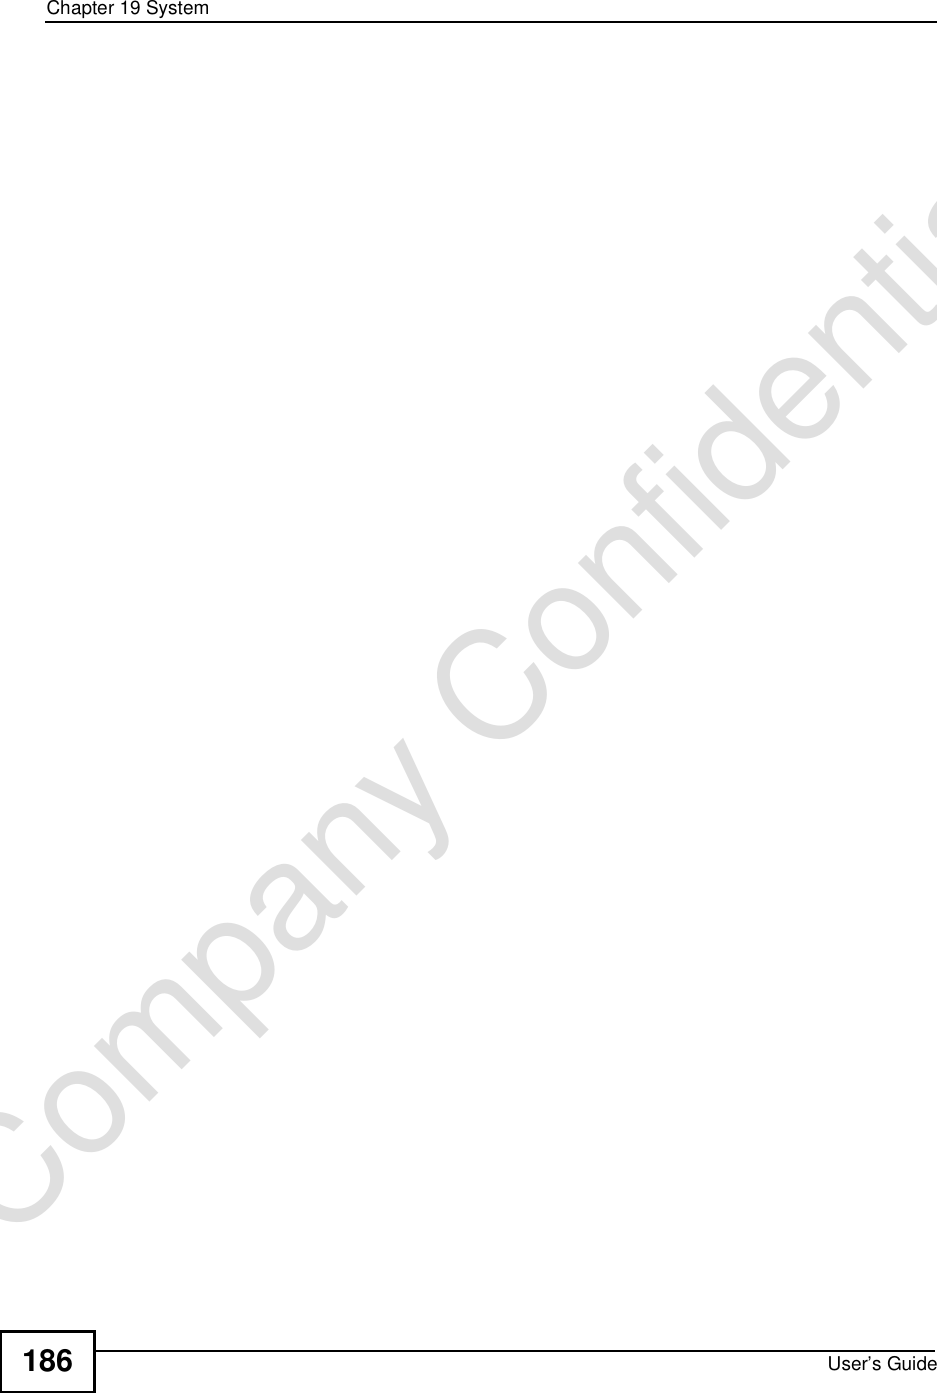 Chapter 19SystemUser’s Guide186Company Confidential